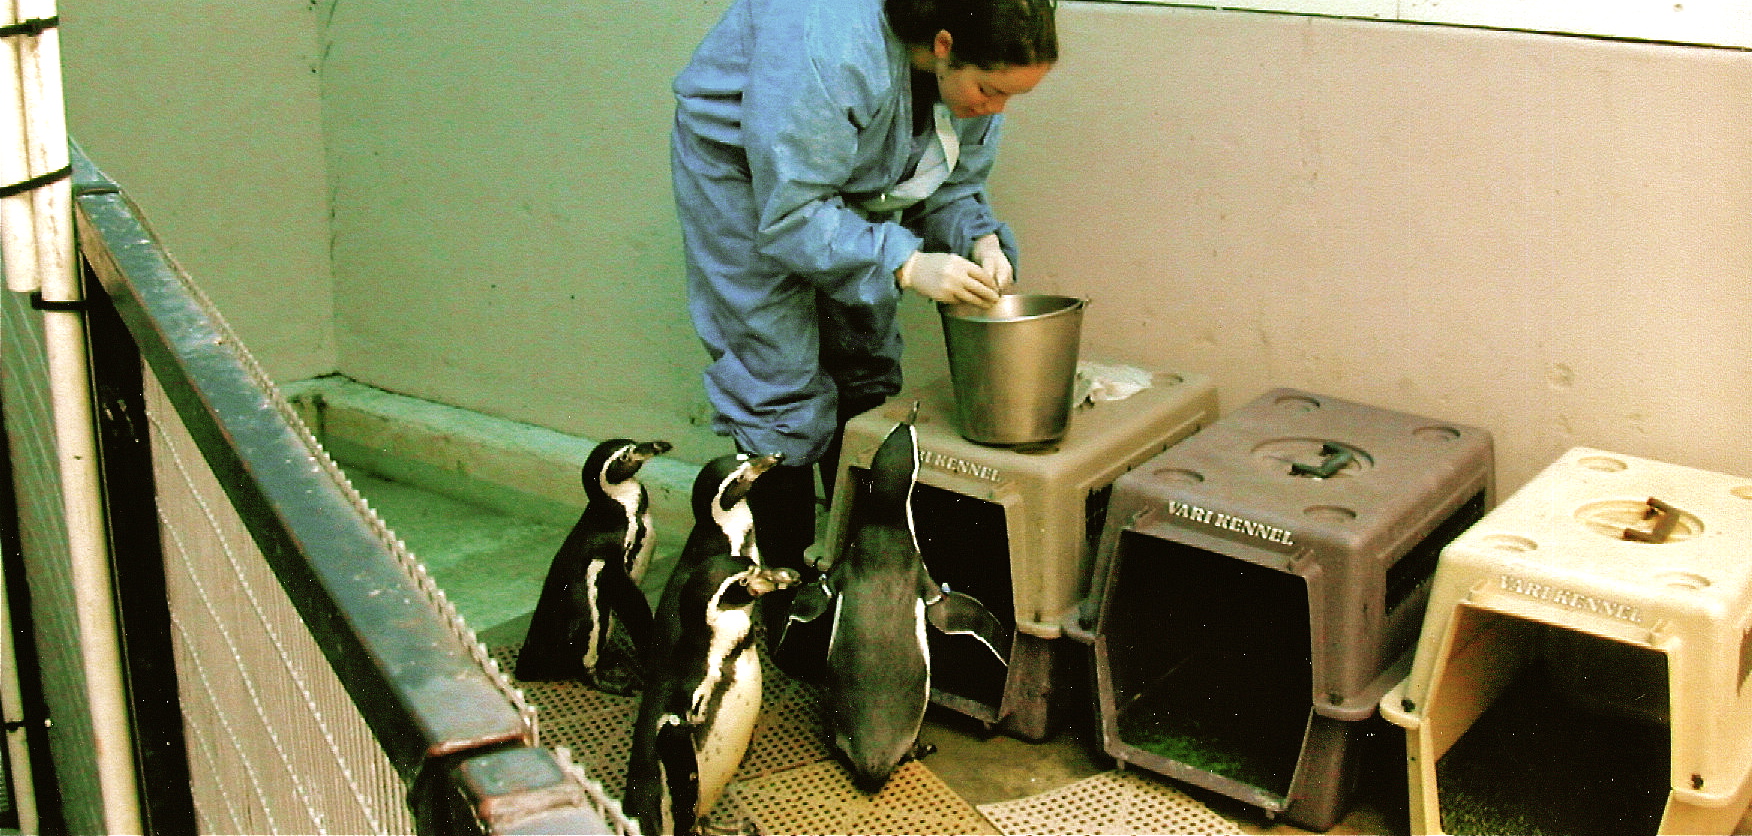 My glory days working as a veterinary intern at the Zoo.